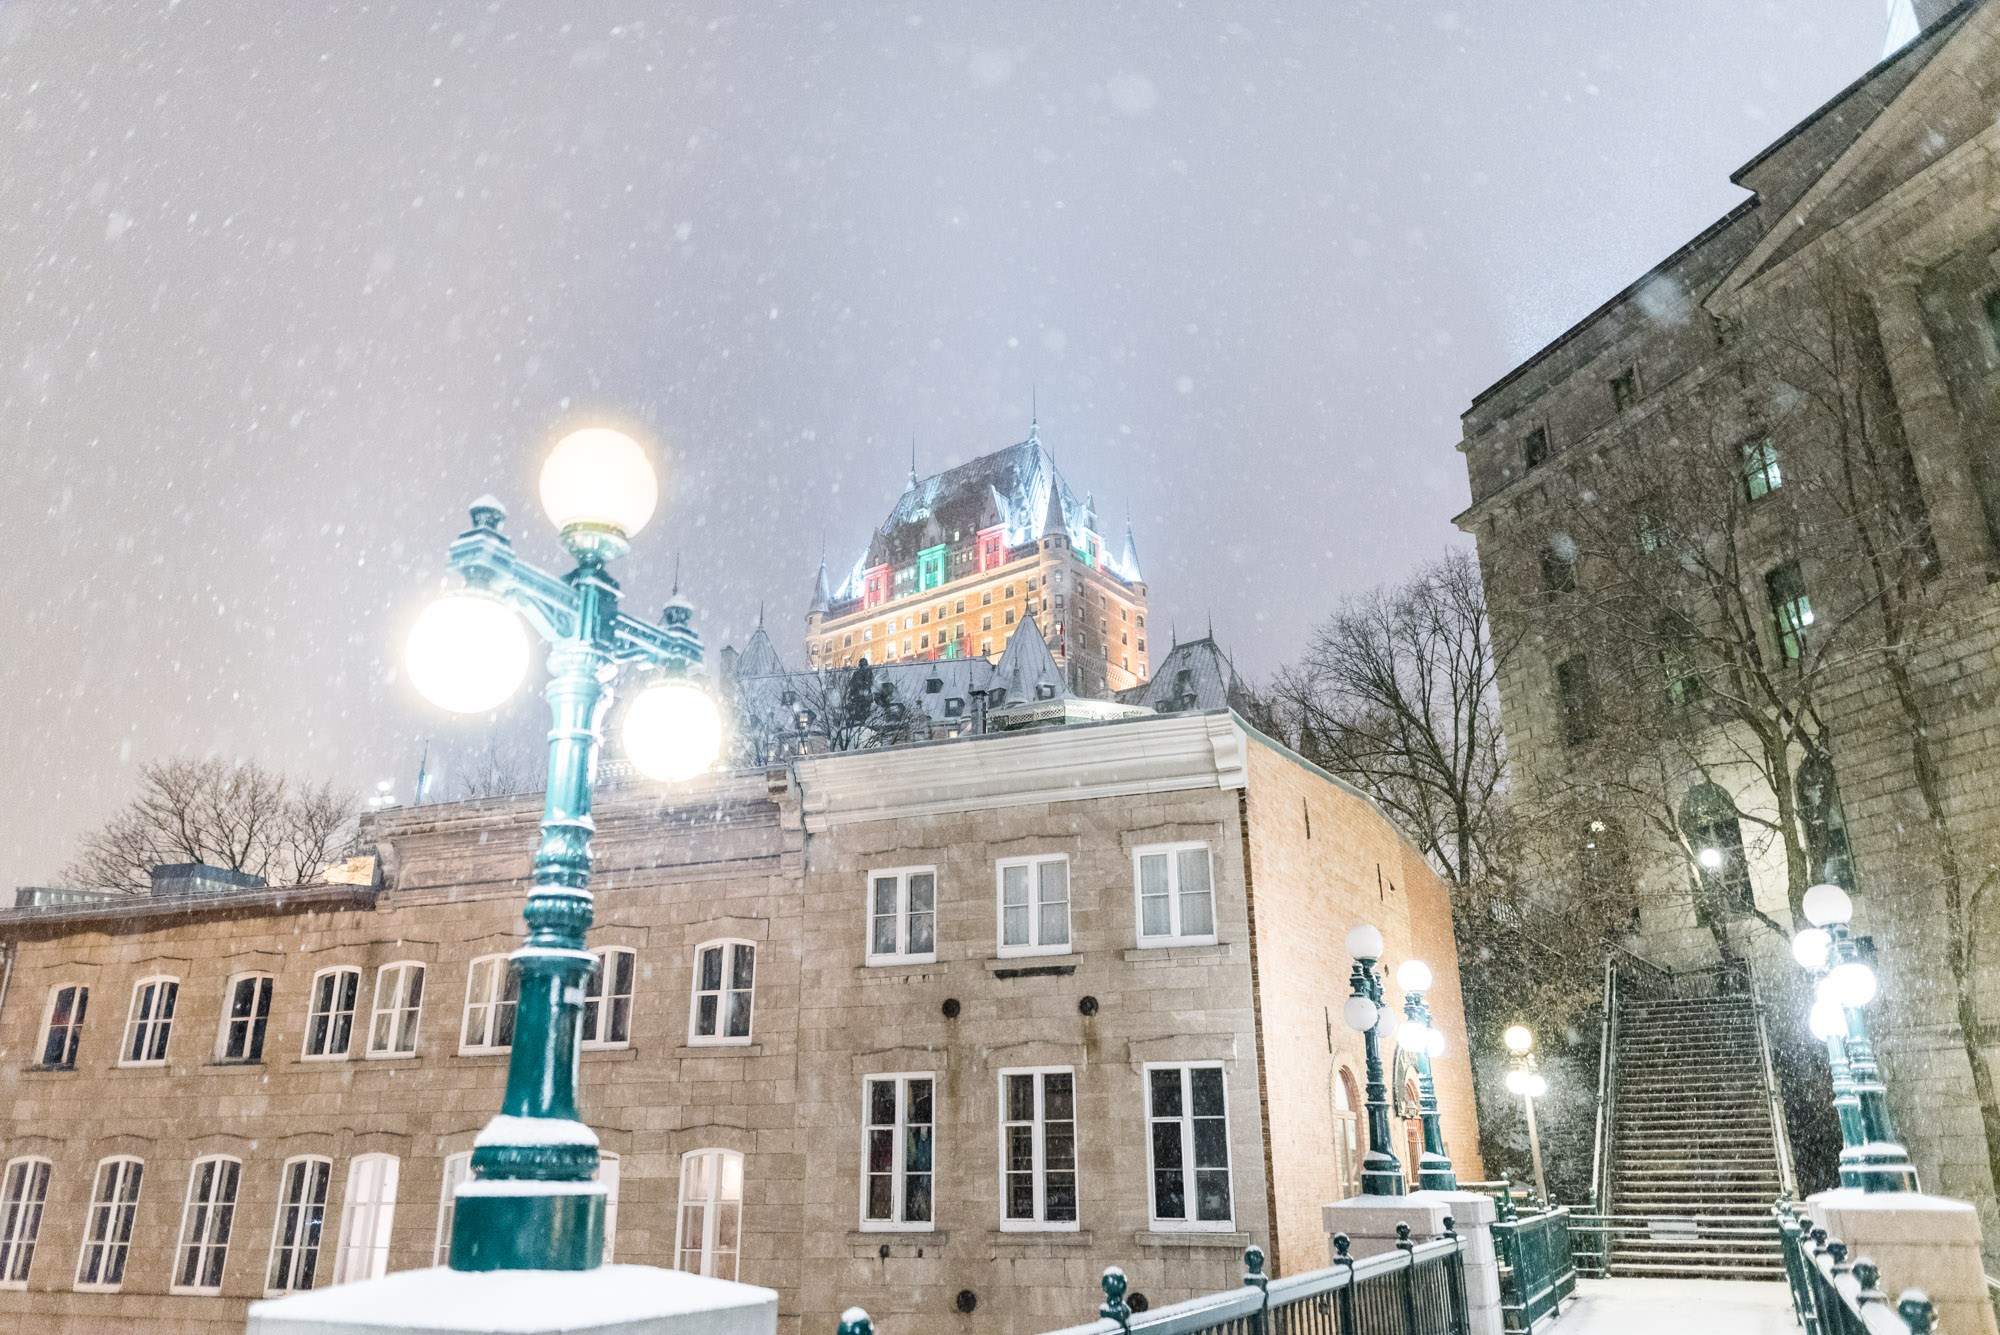 Jeff On The Road - Travel - Winter Wonderland in Quebec City - All photos are under Copyright © 2017 Jeff Frenette Photography / dezjeff. To use the photos, please contact me at dezjeff@me.com.